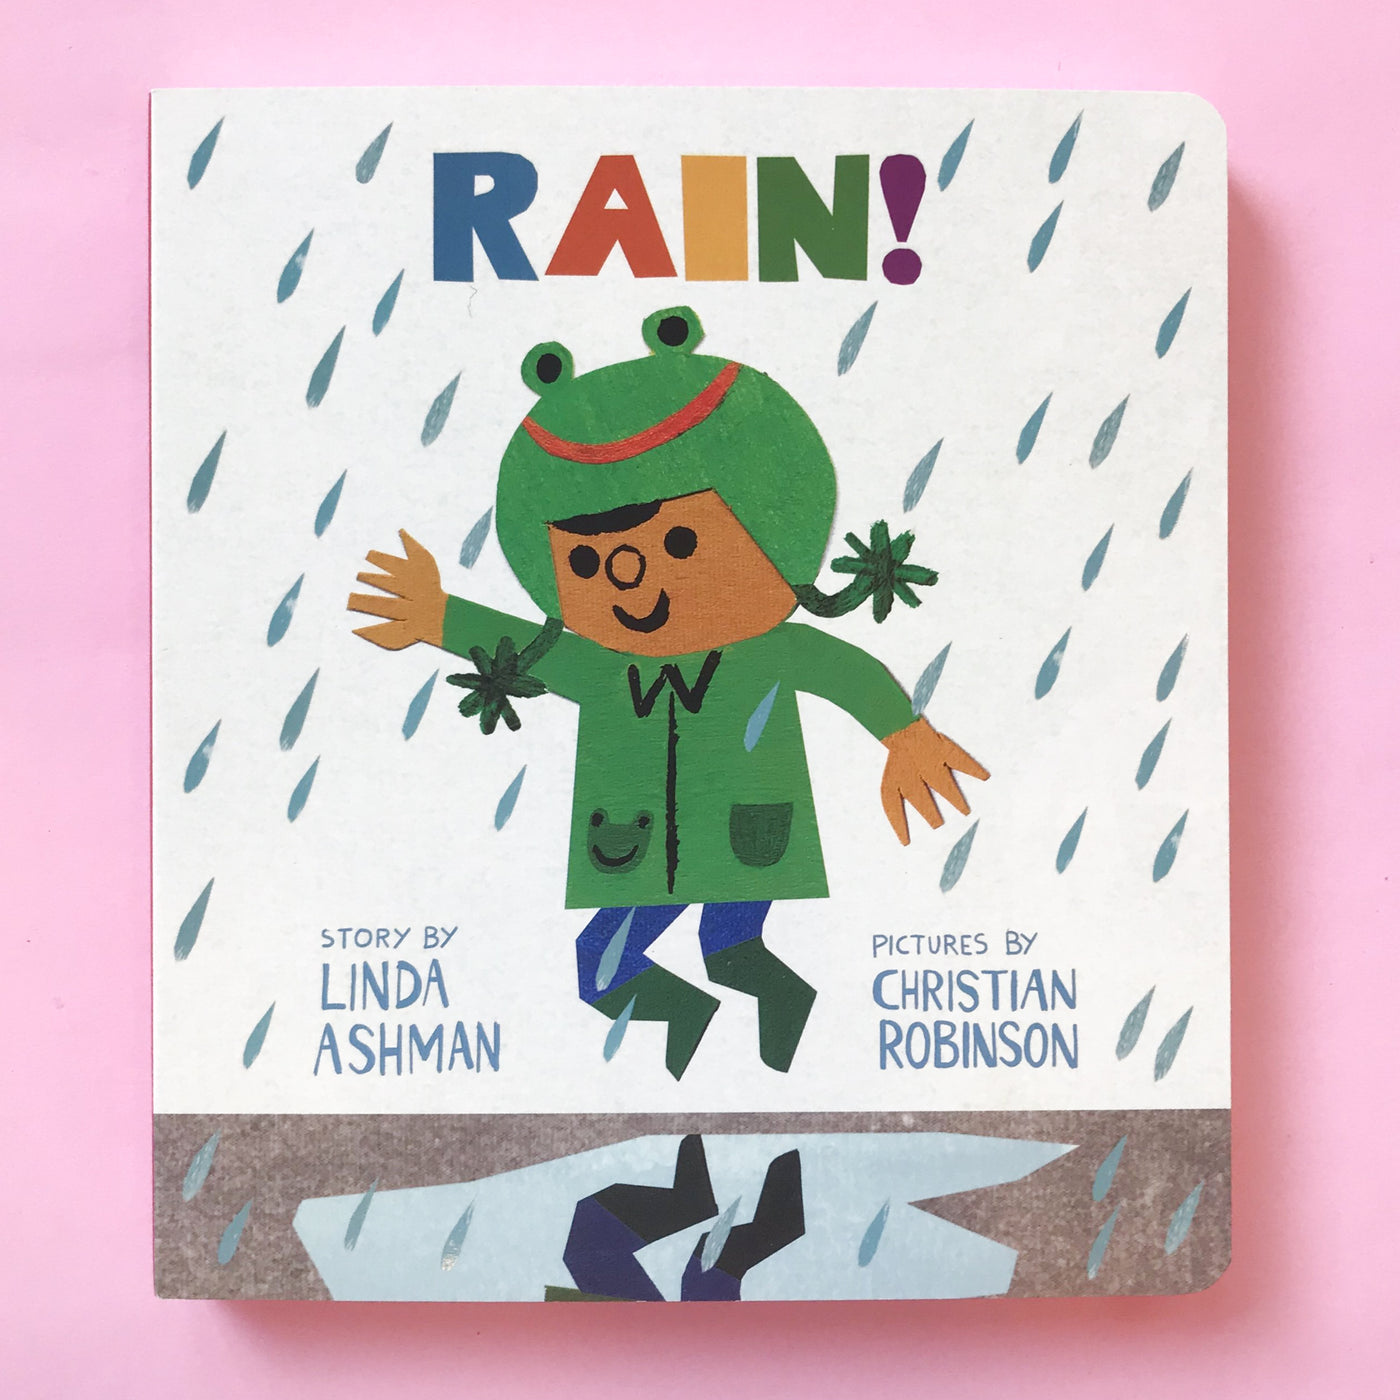 Rain by Linda Ashman with Pictures by Christian Robinson